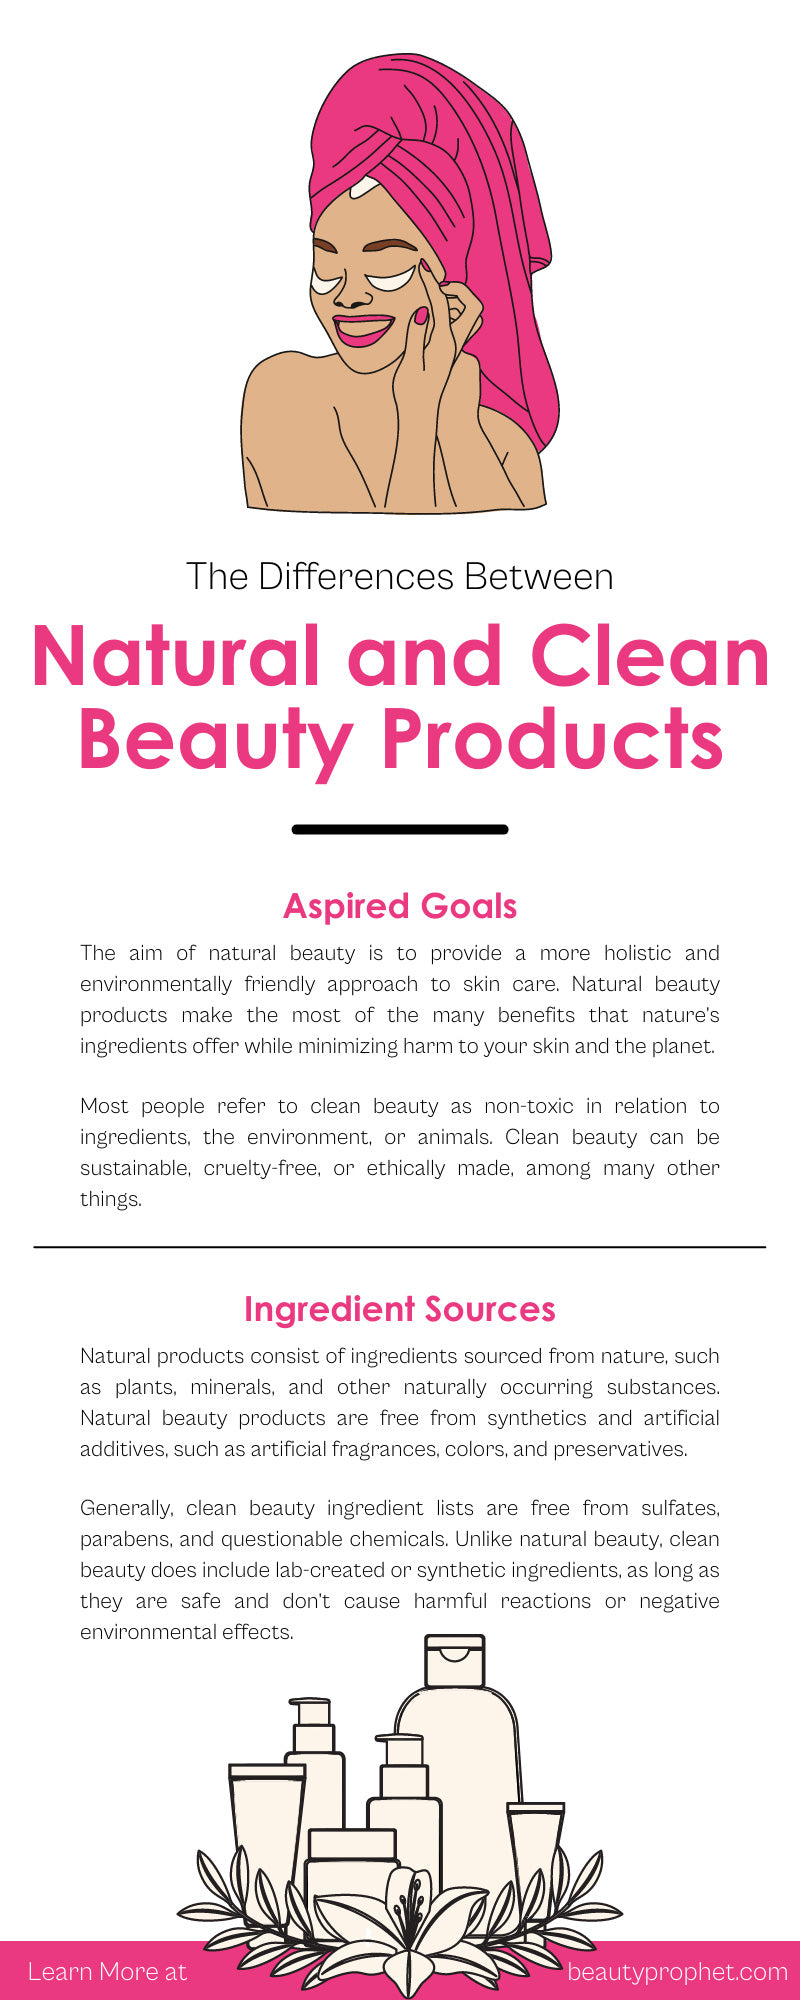 The Differences Between Natural and Clean Beauty Products